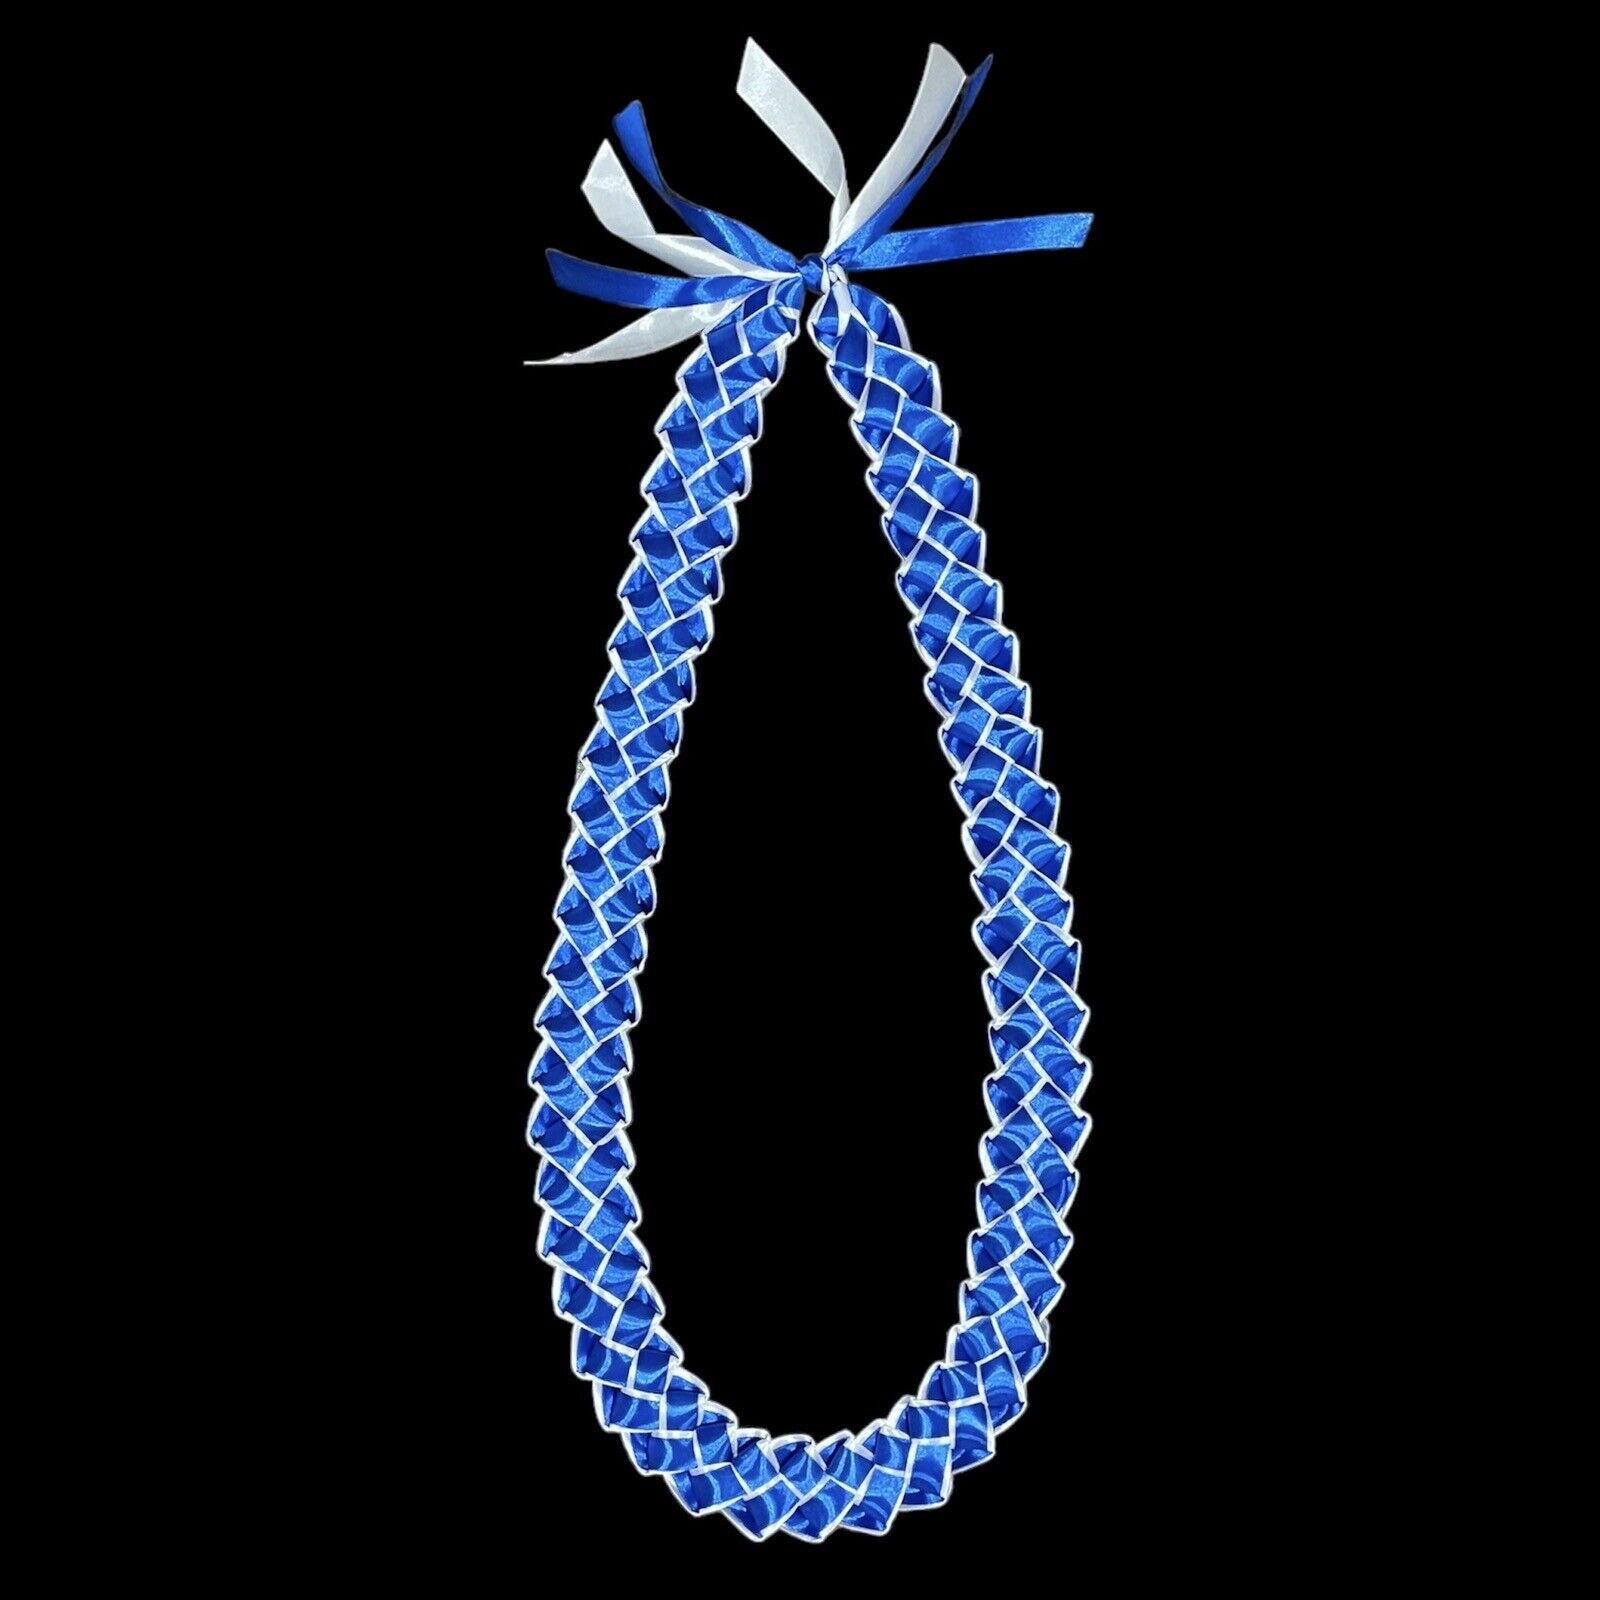 Blue And White Braided 4 Ribbon Graduation Gift Lei Hand Made 1.5” Wide